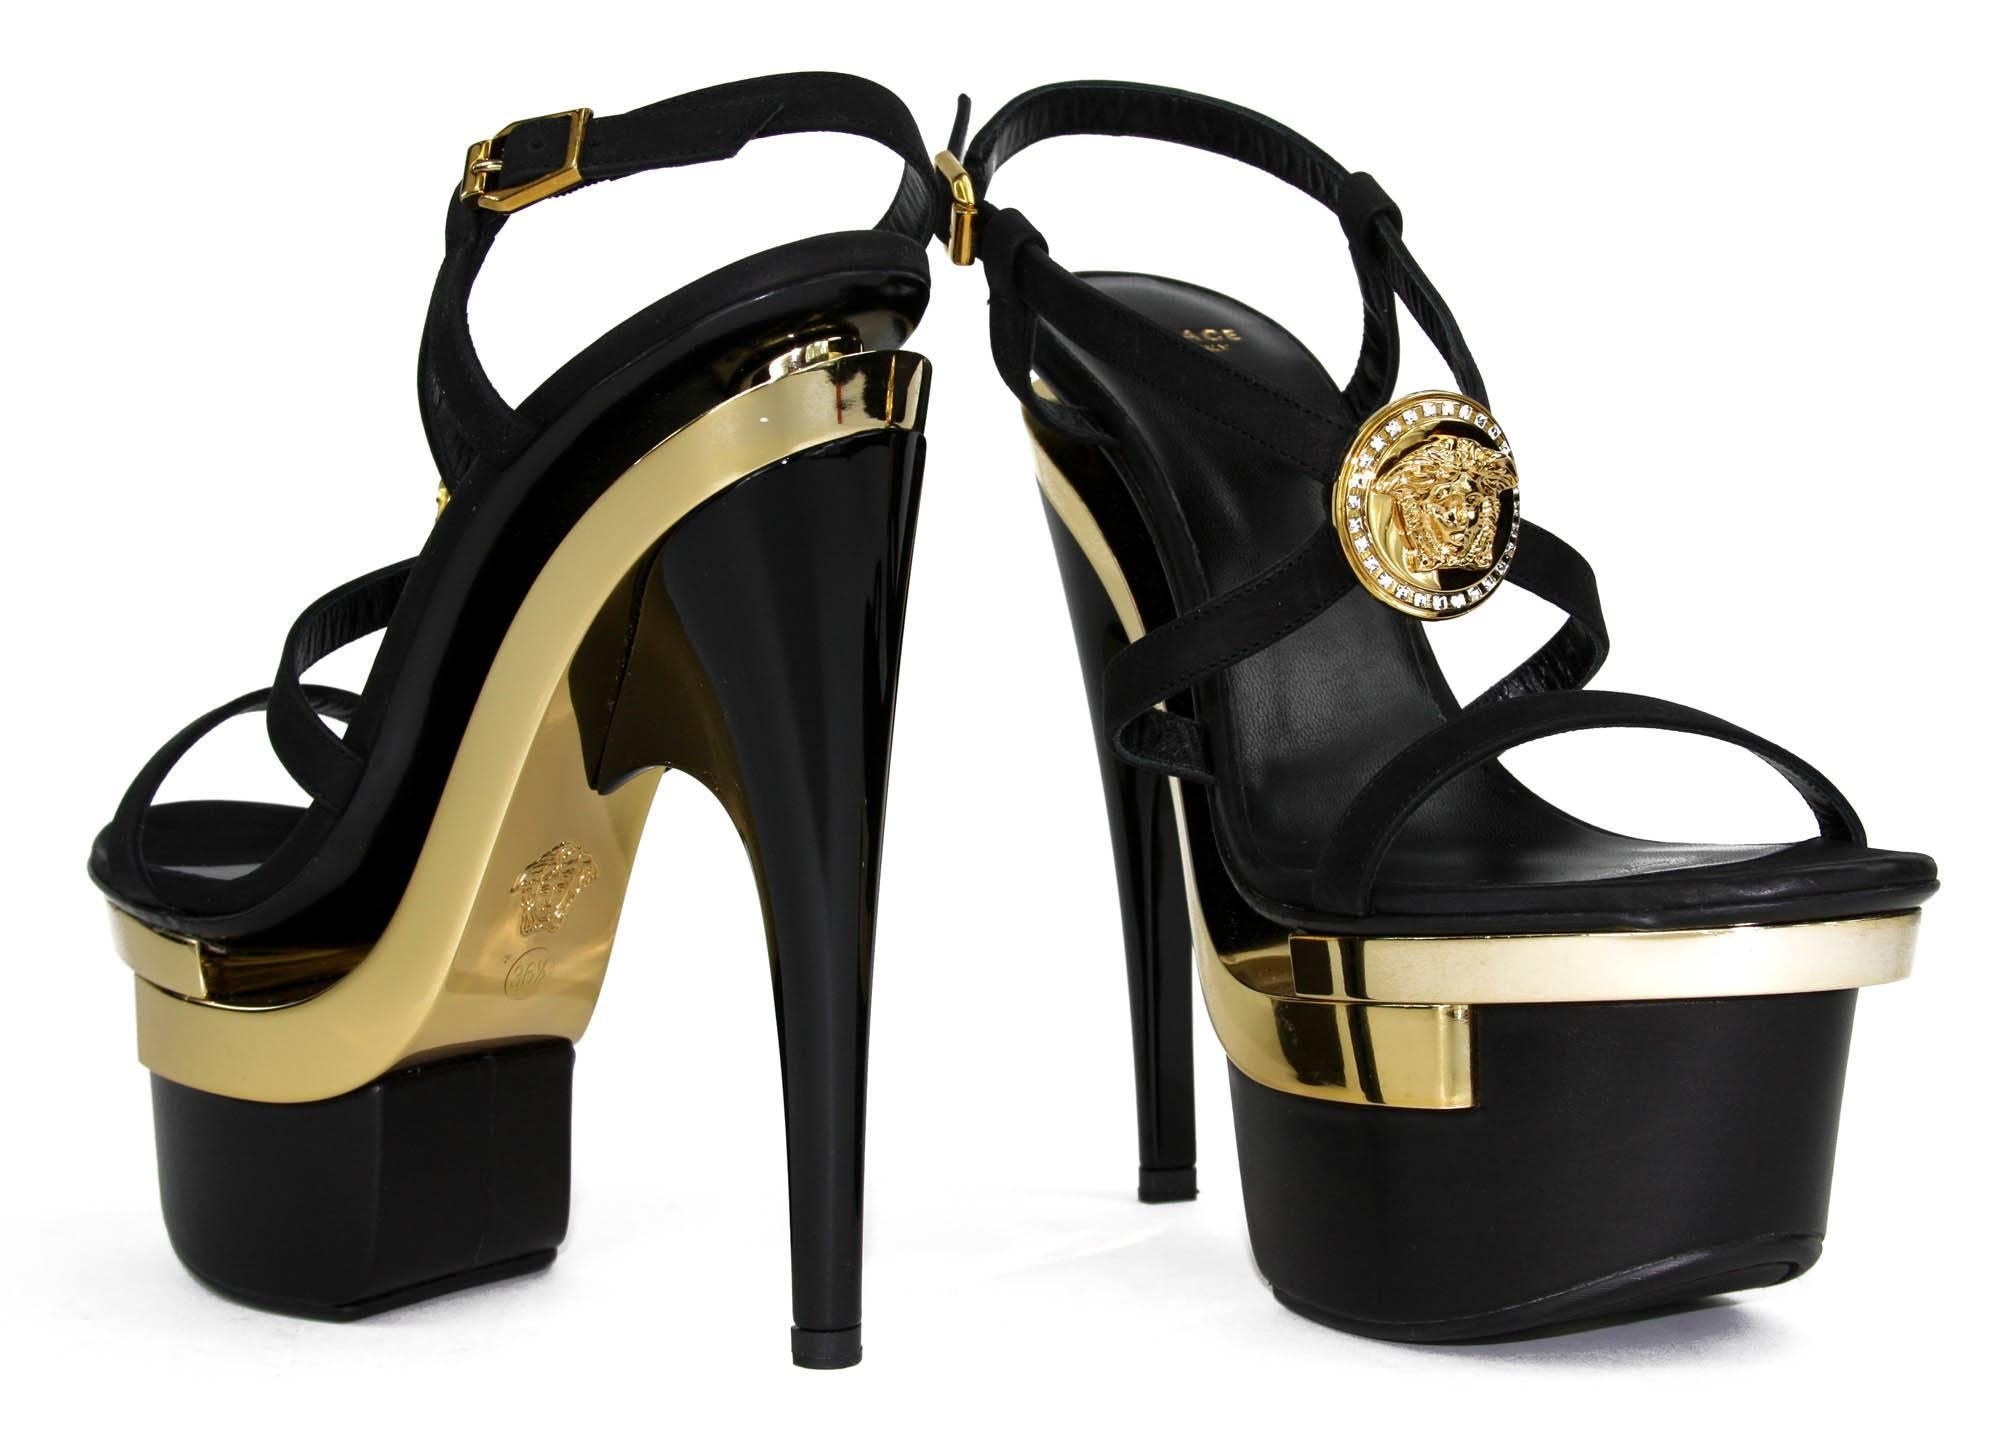 New Versace Triple Platform Strap Sandals
Sizes Available - 35.5, 37, 37.5, 38, 38.5, 39, 39.5, 40, 40.5, 41.
Colors - Gold and Black
100% Leather
Swarovski Crystals Gold Medusa 
Leather Lining 
Leather Sole
Heel Height - 6.5